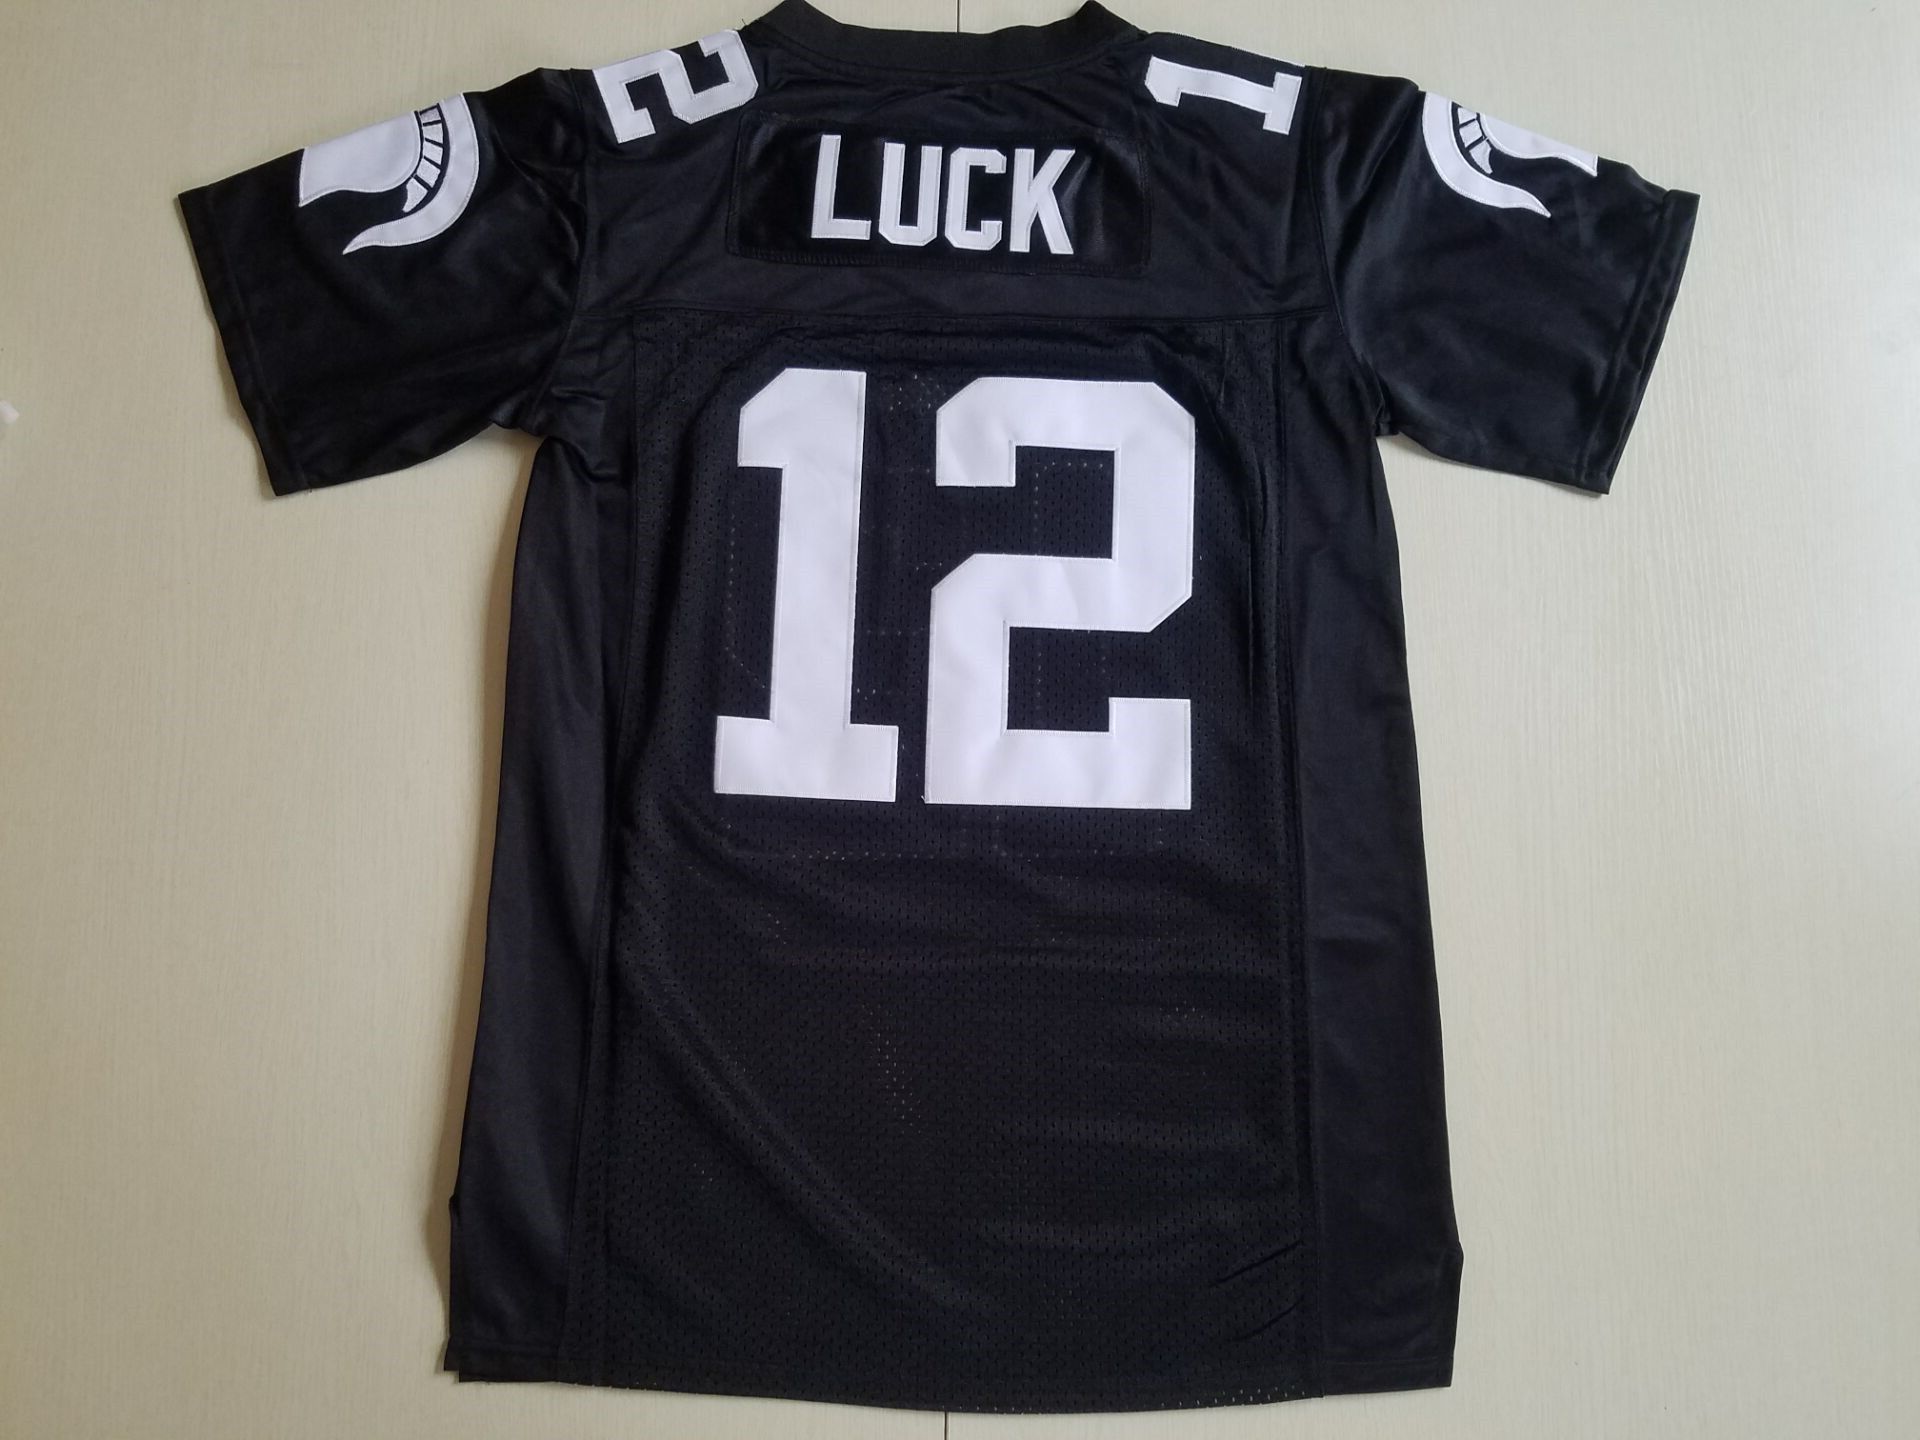 stitched andrew luck jersey